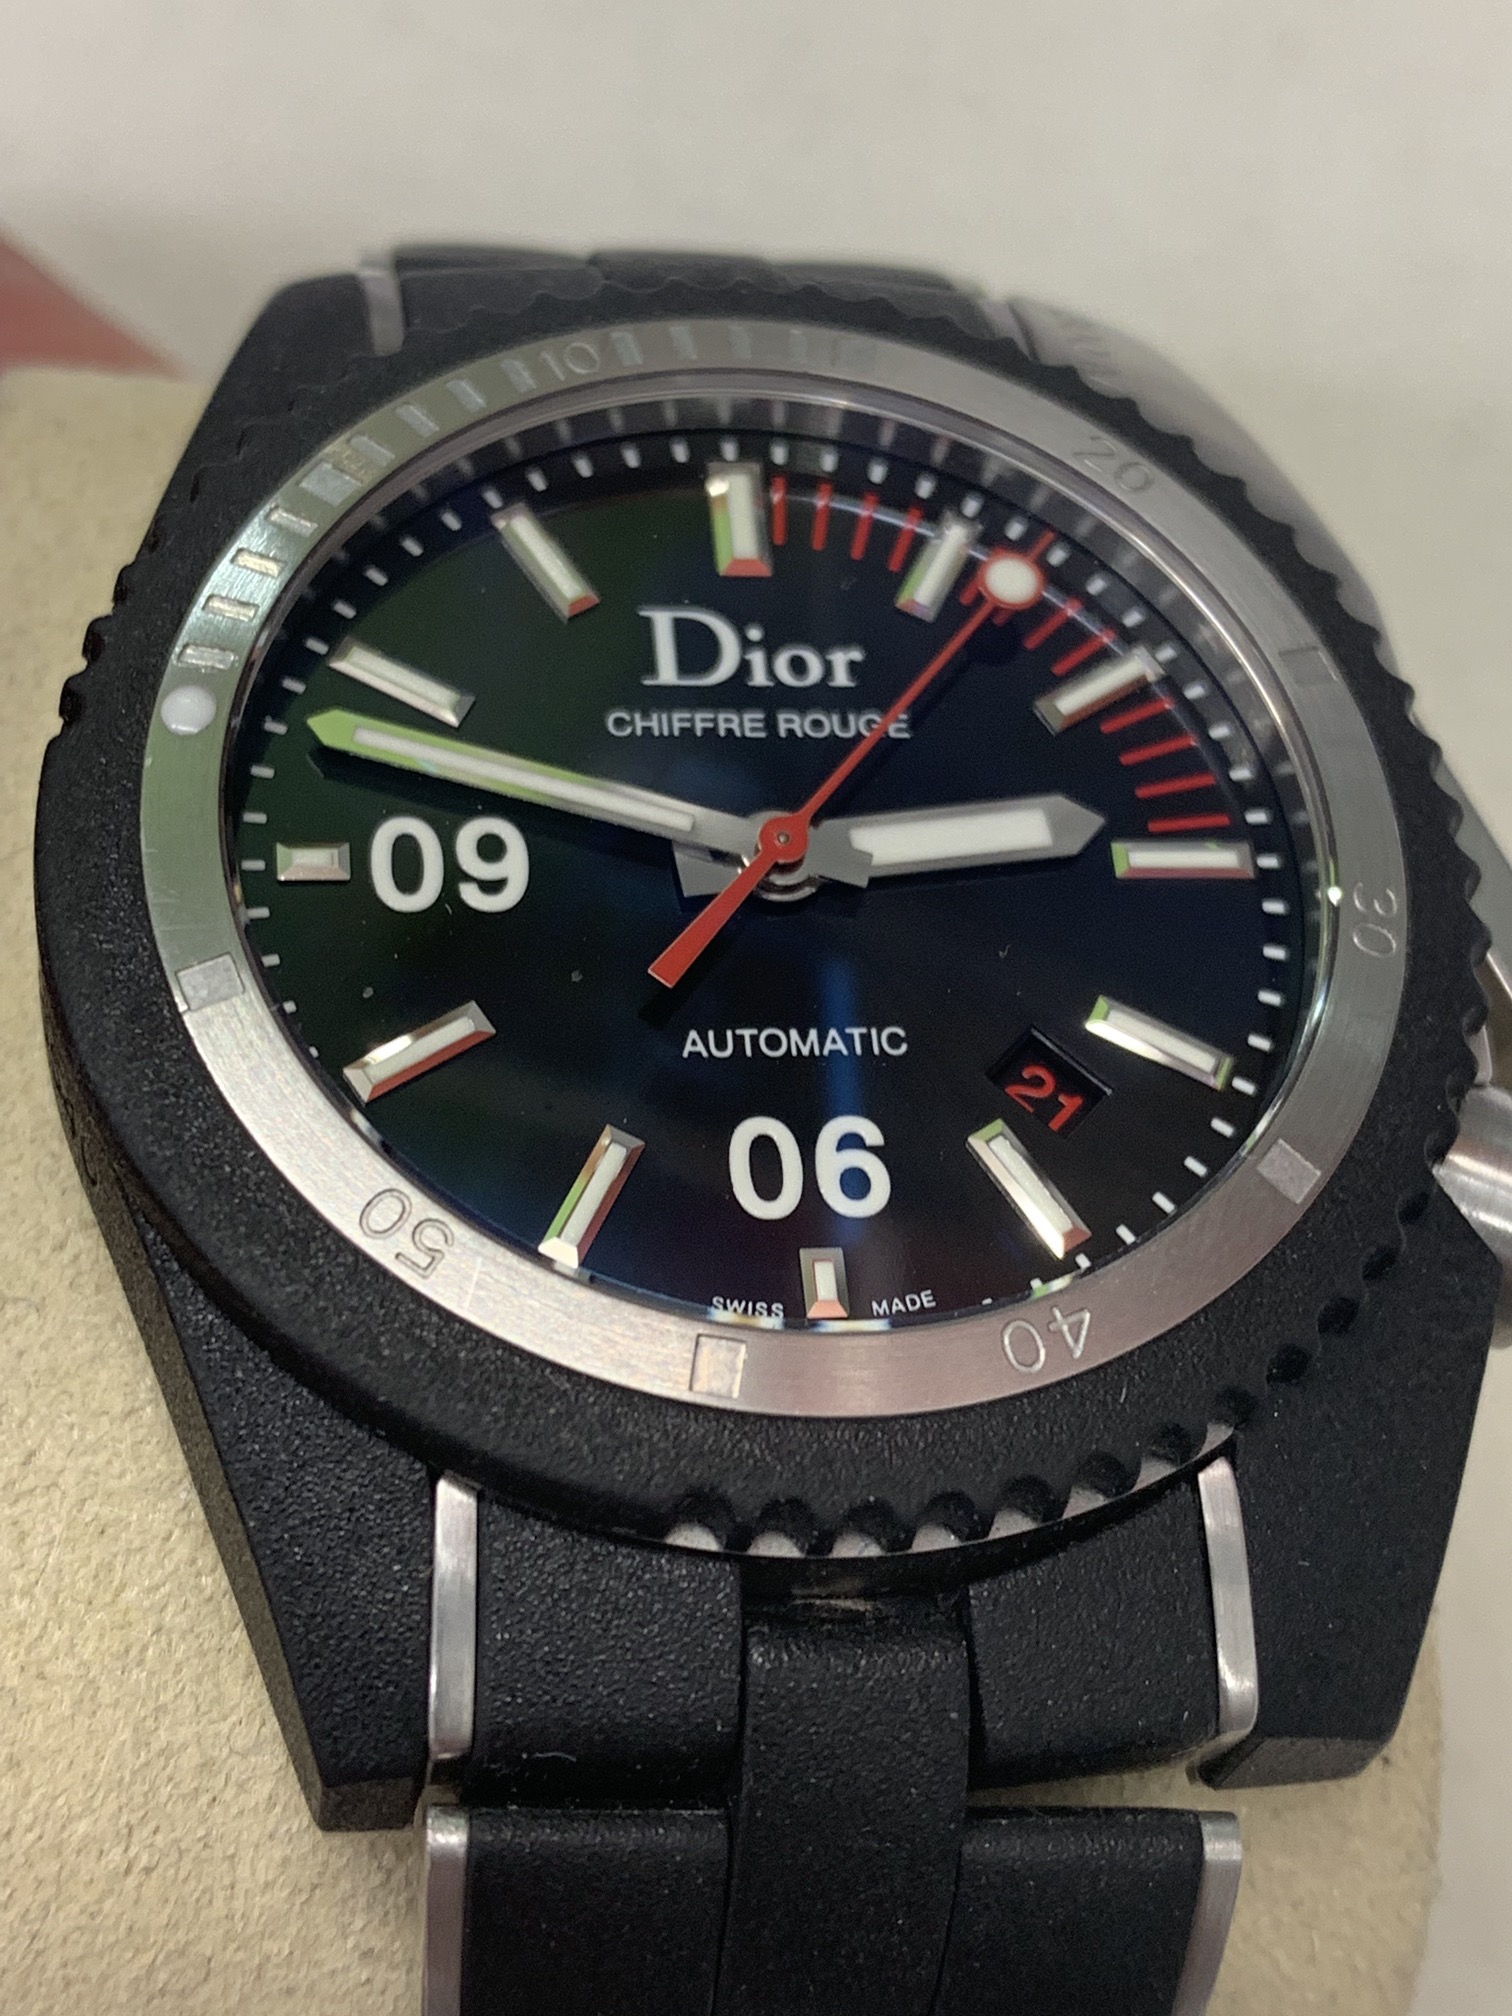 DIOR CHIFFRE ROUGE DIVING WATCH 42mm - Image 2 of 8